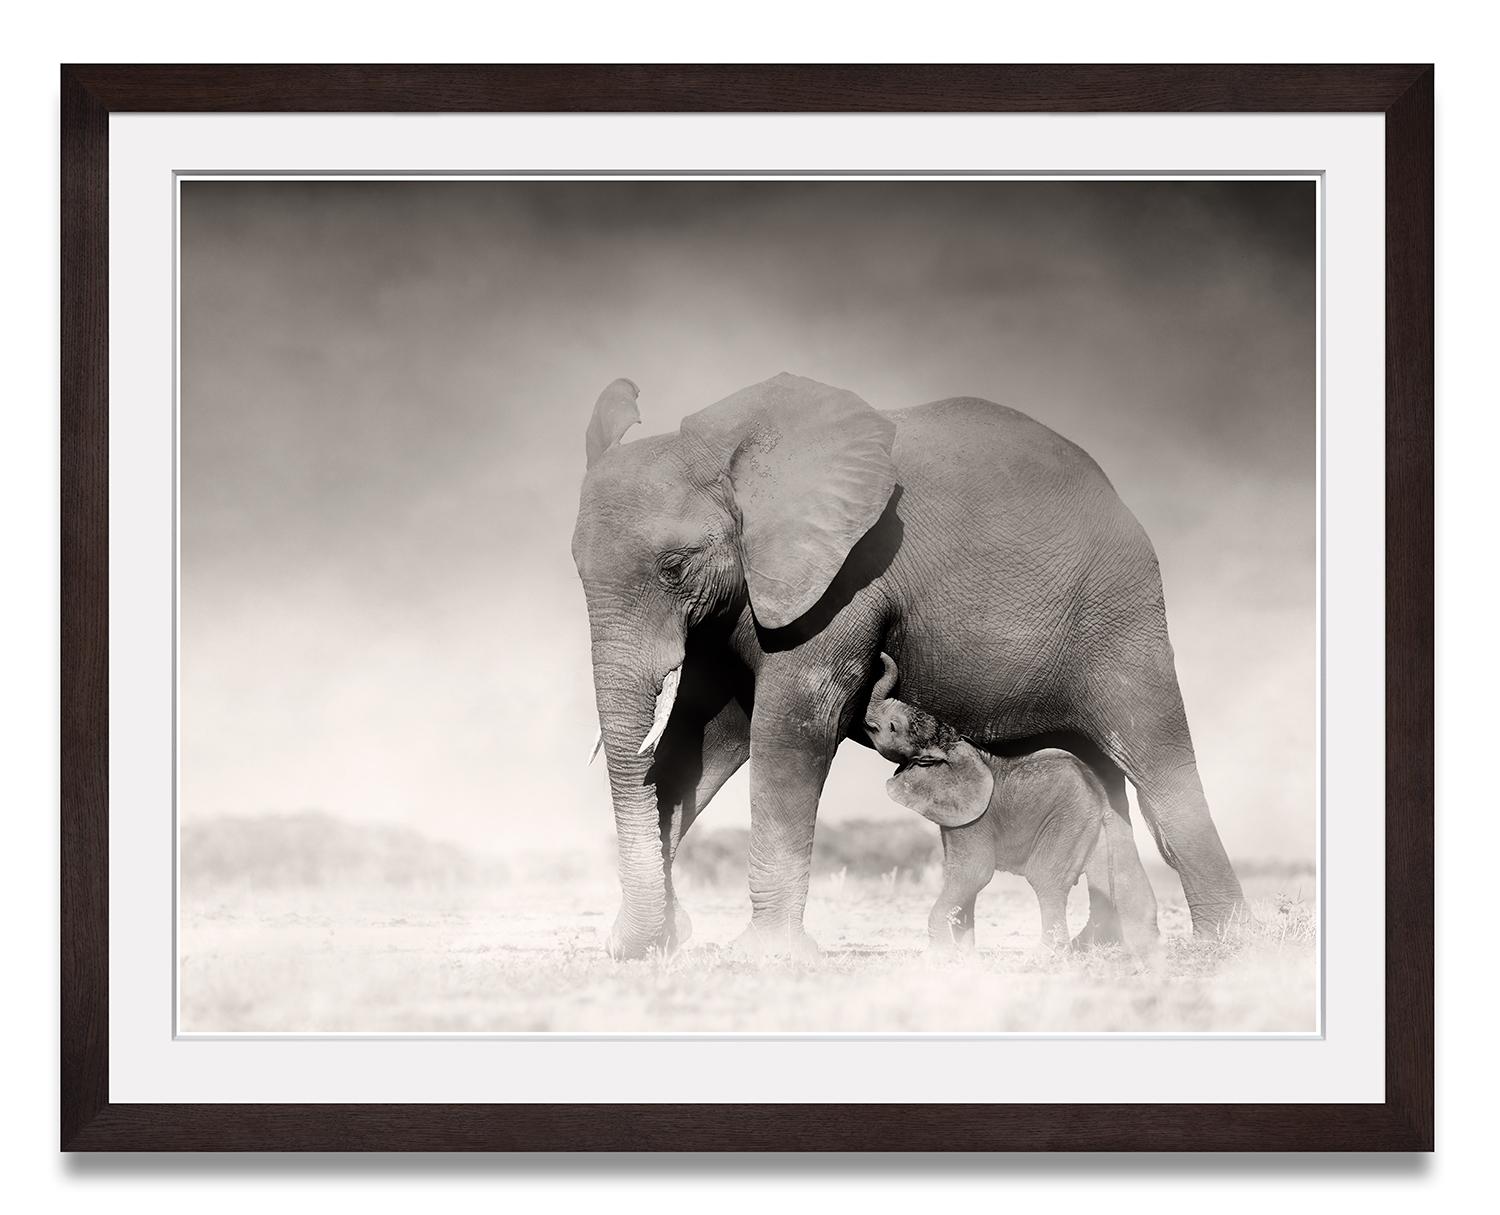 Connected II, Kenya, animal, wildlife, black and white photography, elephant - Photograph by Joachim Schmeisser